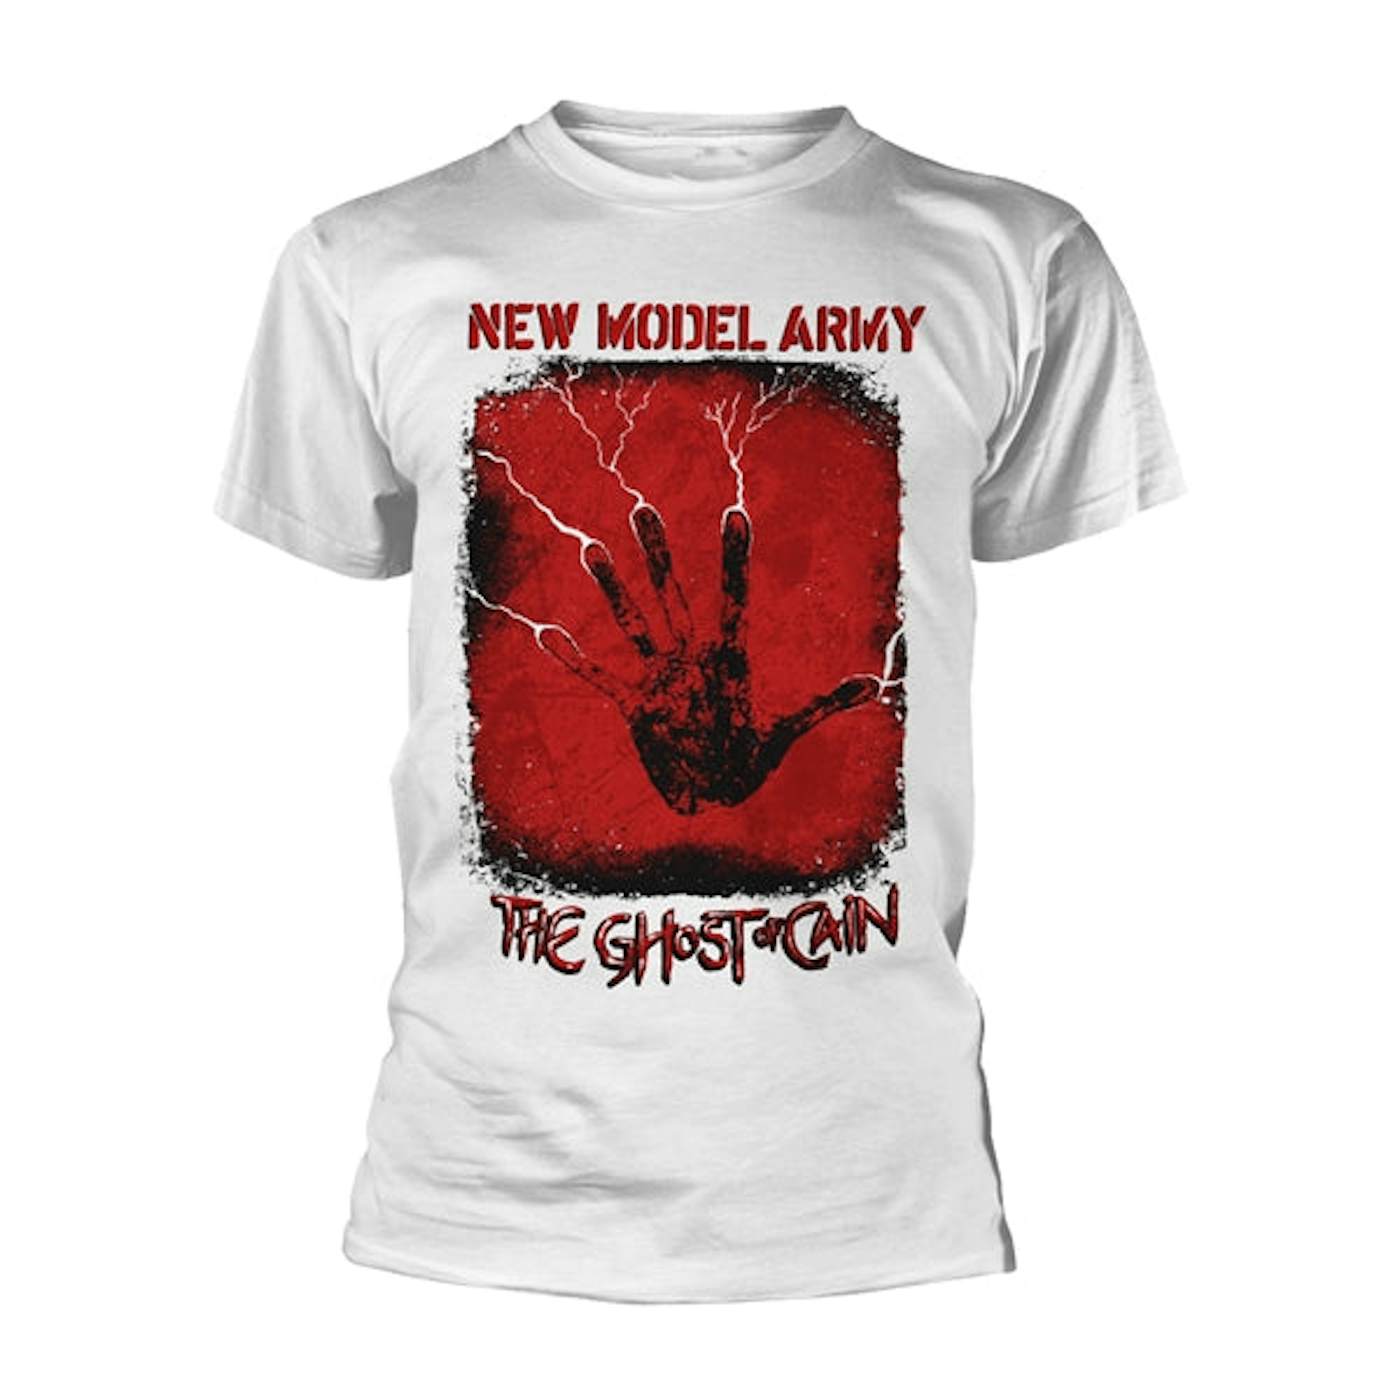 New Model Army T-Shirt - The Ghost Of Cain (White)